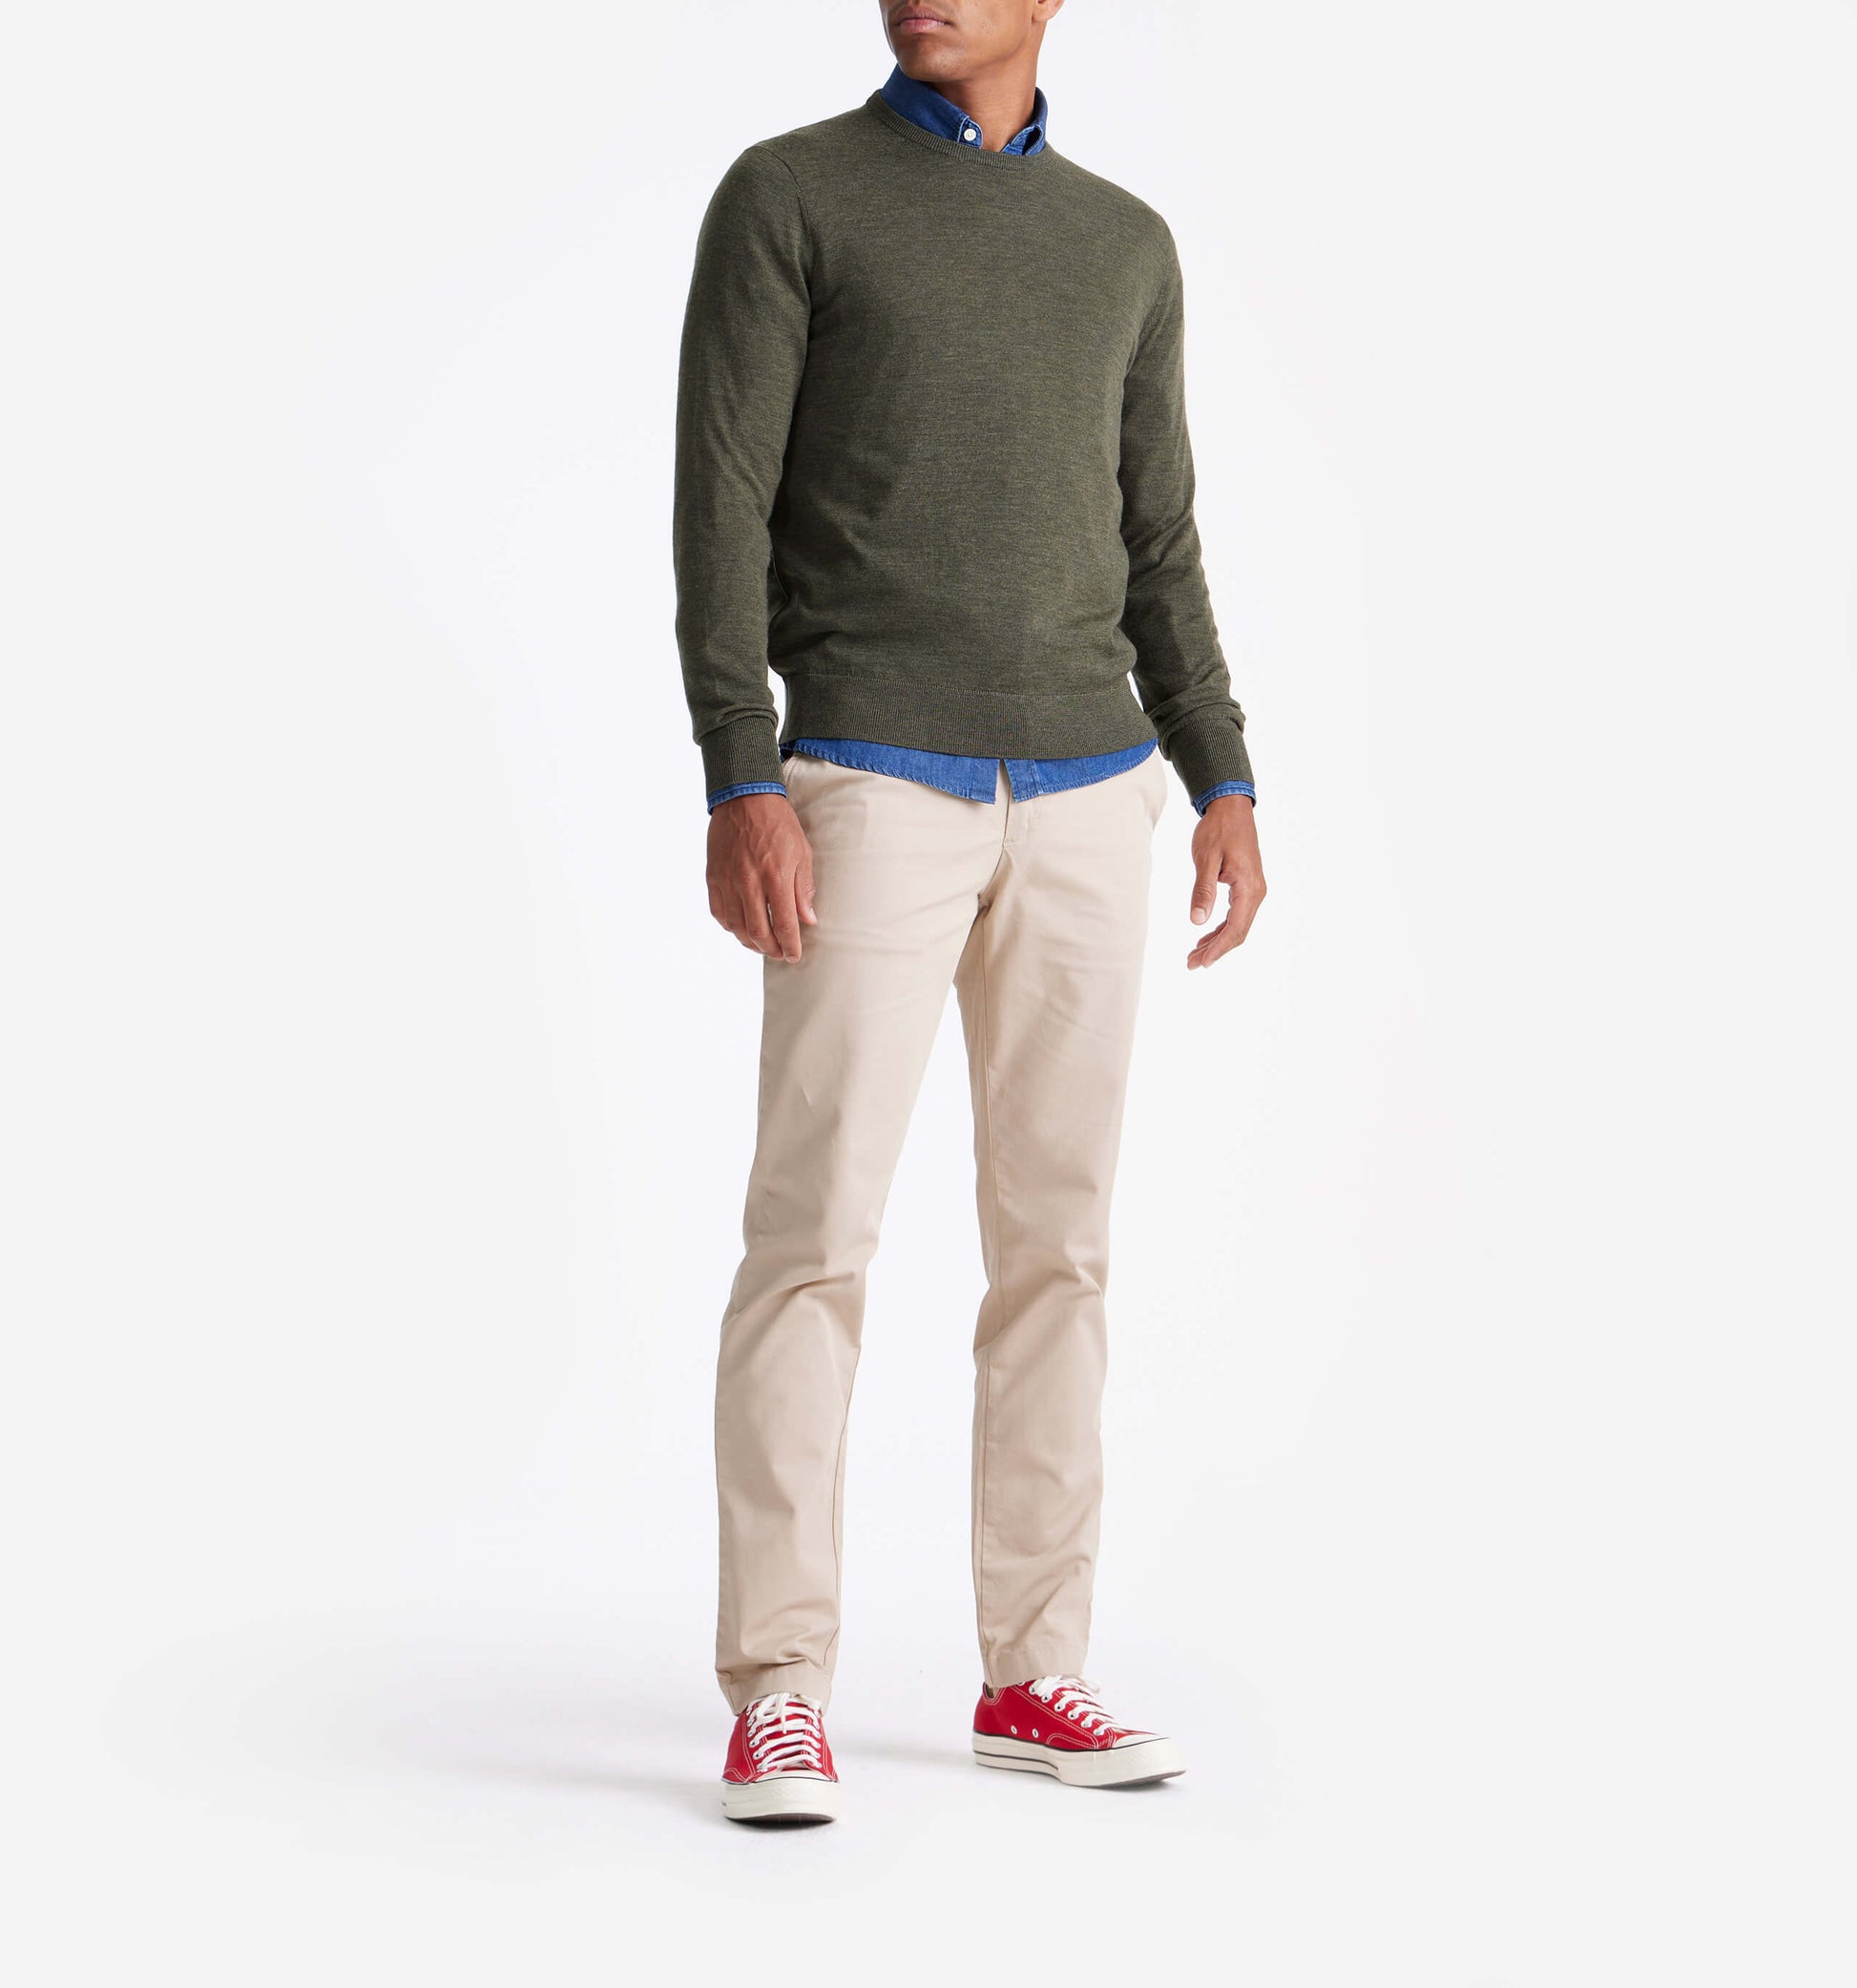 The John - Merino Wool Crewneck In Army From King Essentials